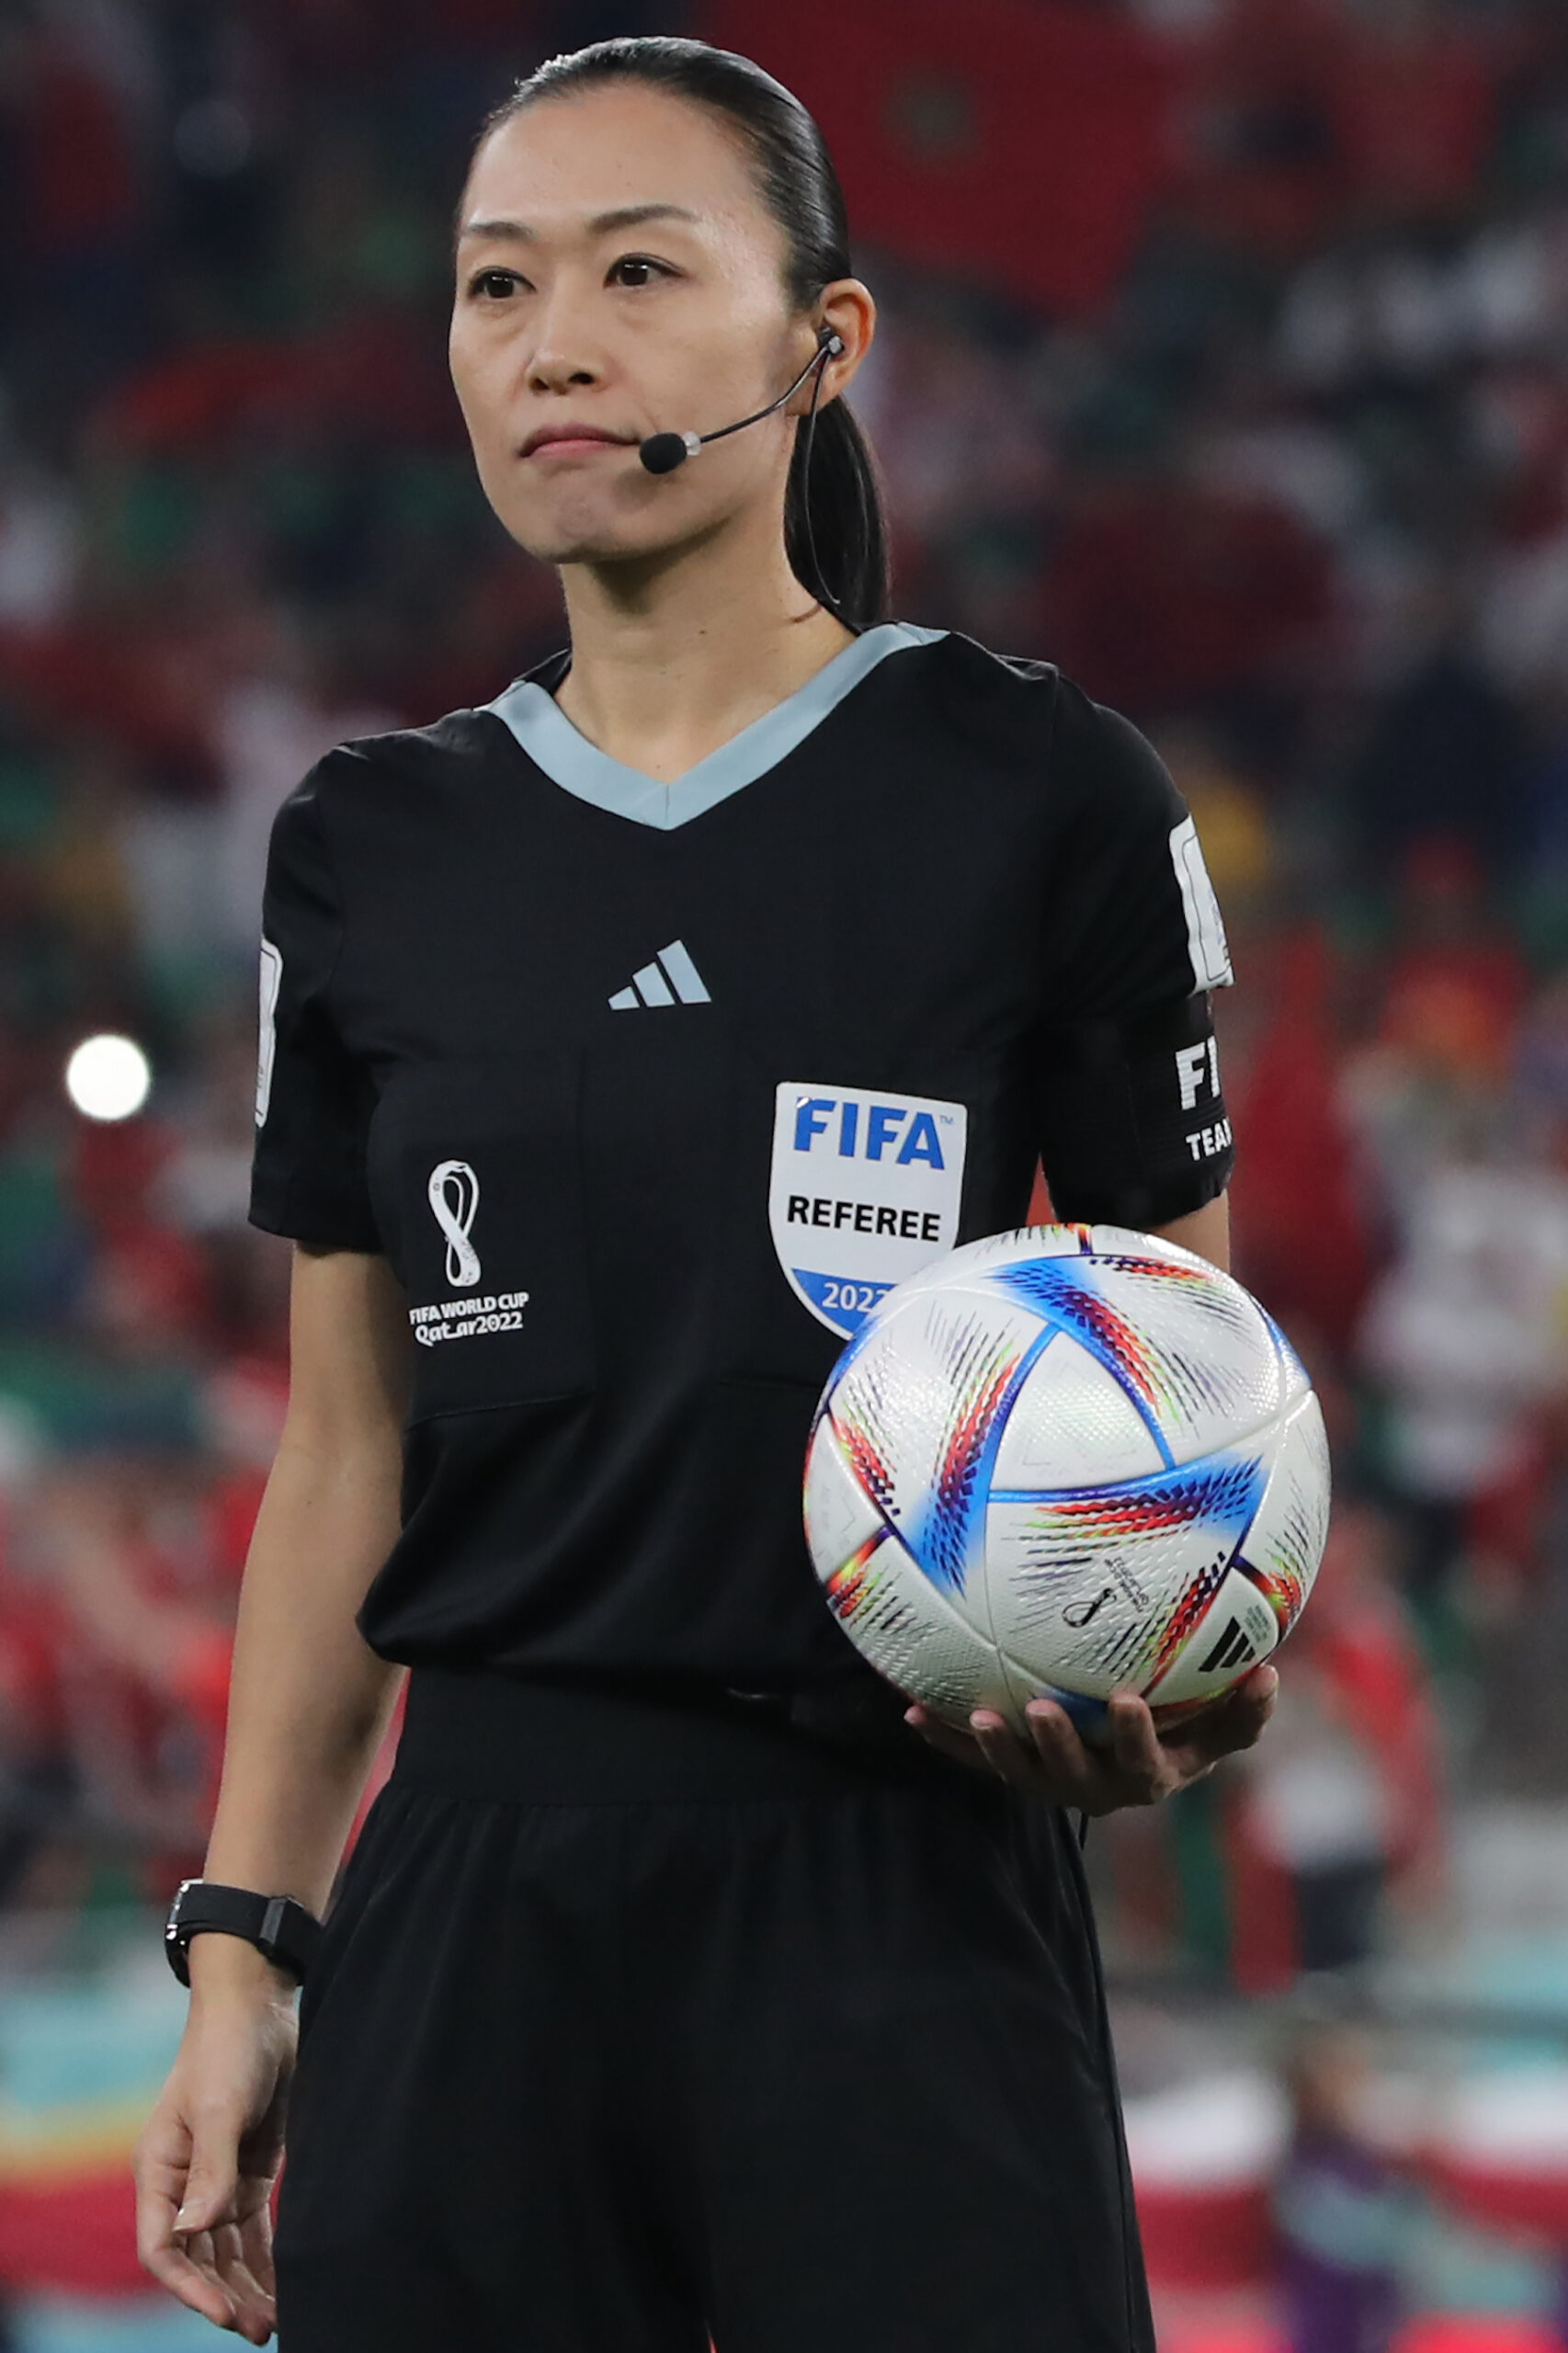 This Japanese Woman Referee Has Become One Of The First Women To Officiate Matches At The World Cup